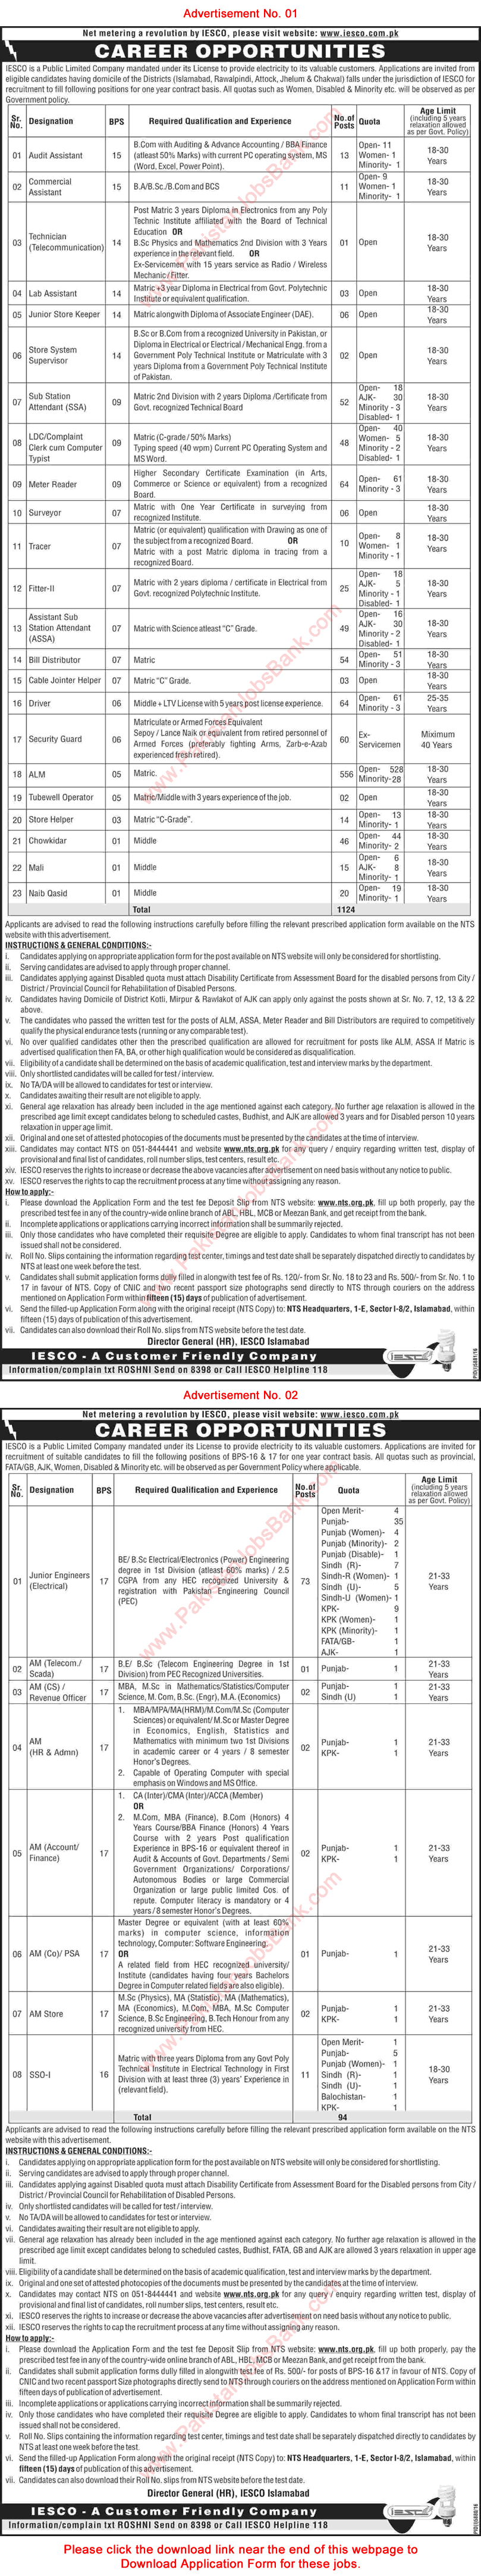 IESCO Jobs 2017 May WAPDA NTS Application Form Assistant Lineman, Junior Engineers & Others Latest / New